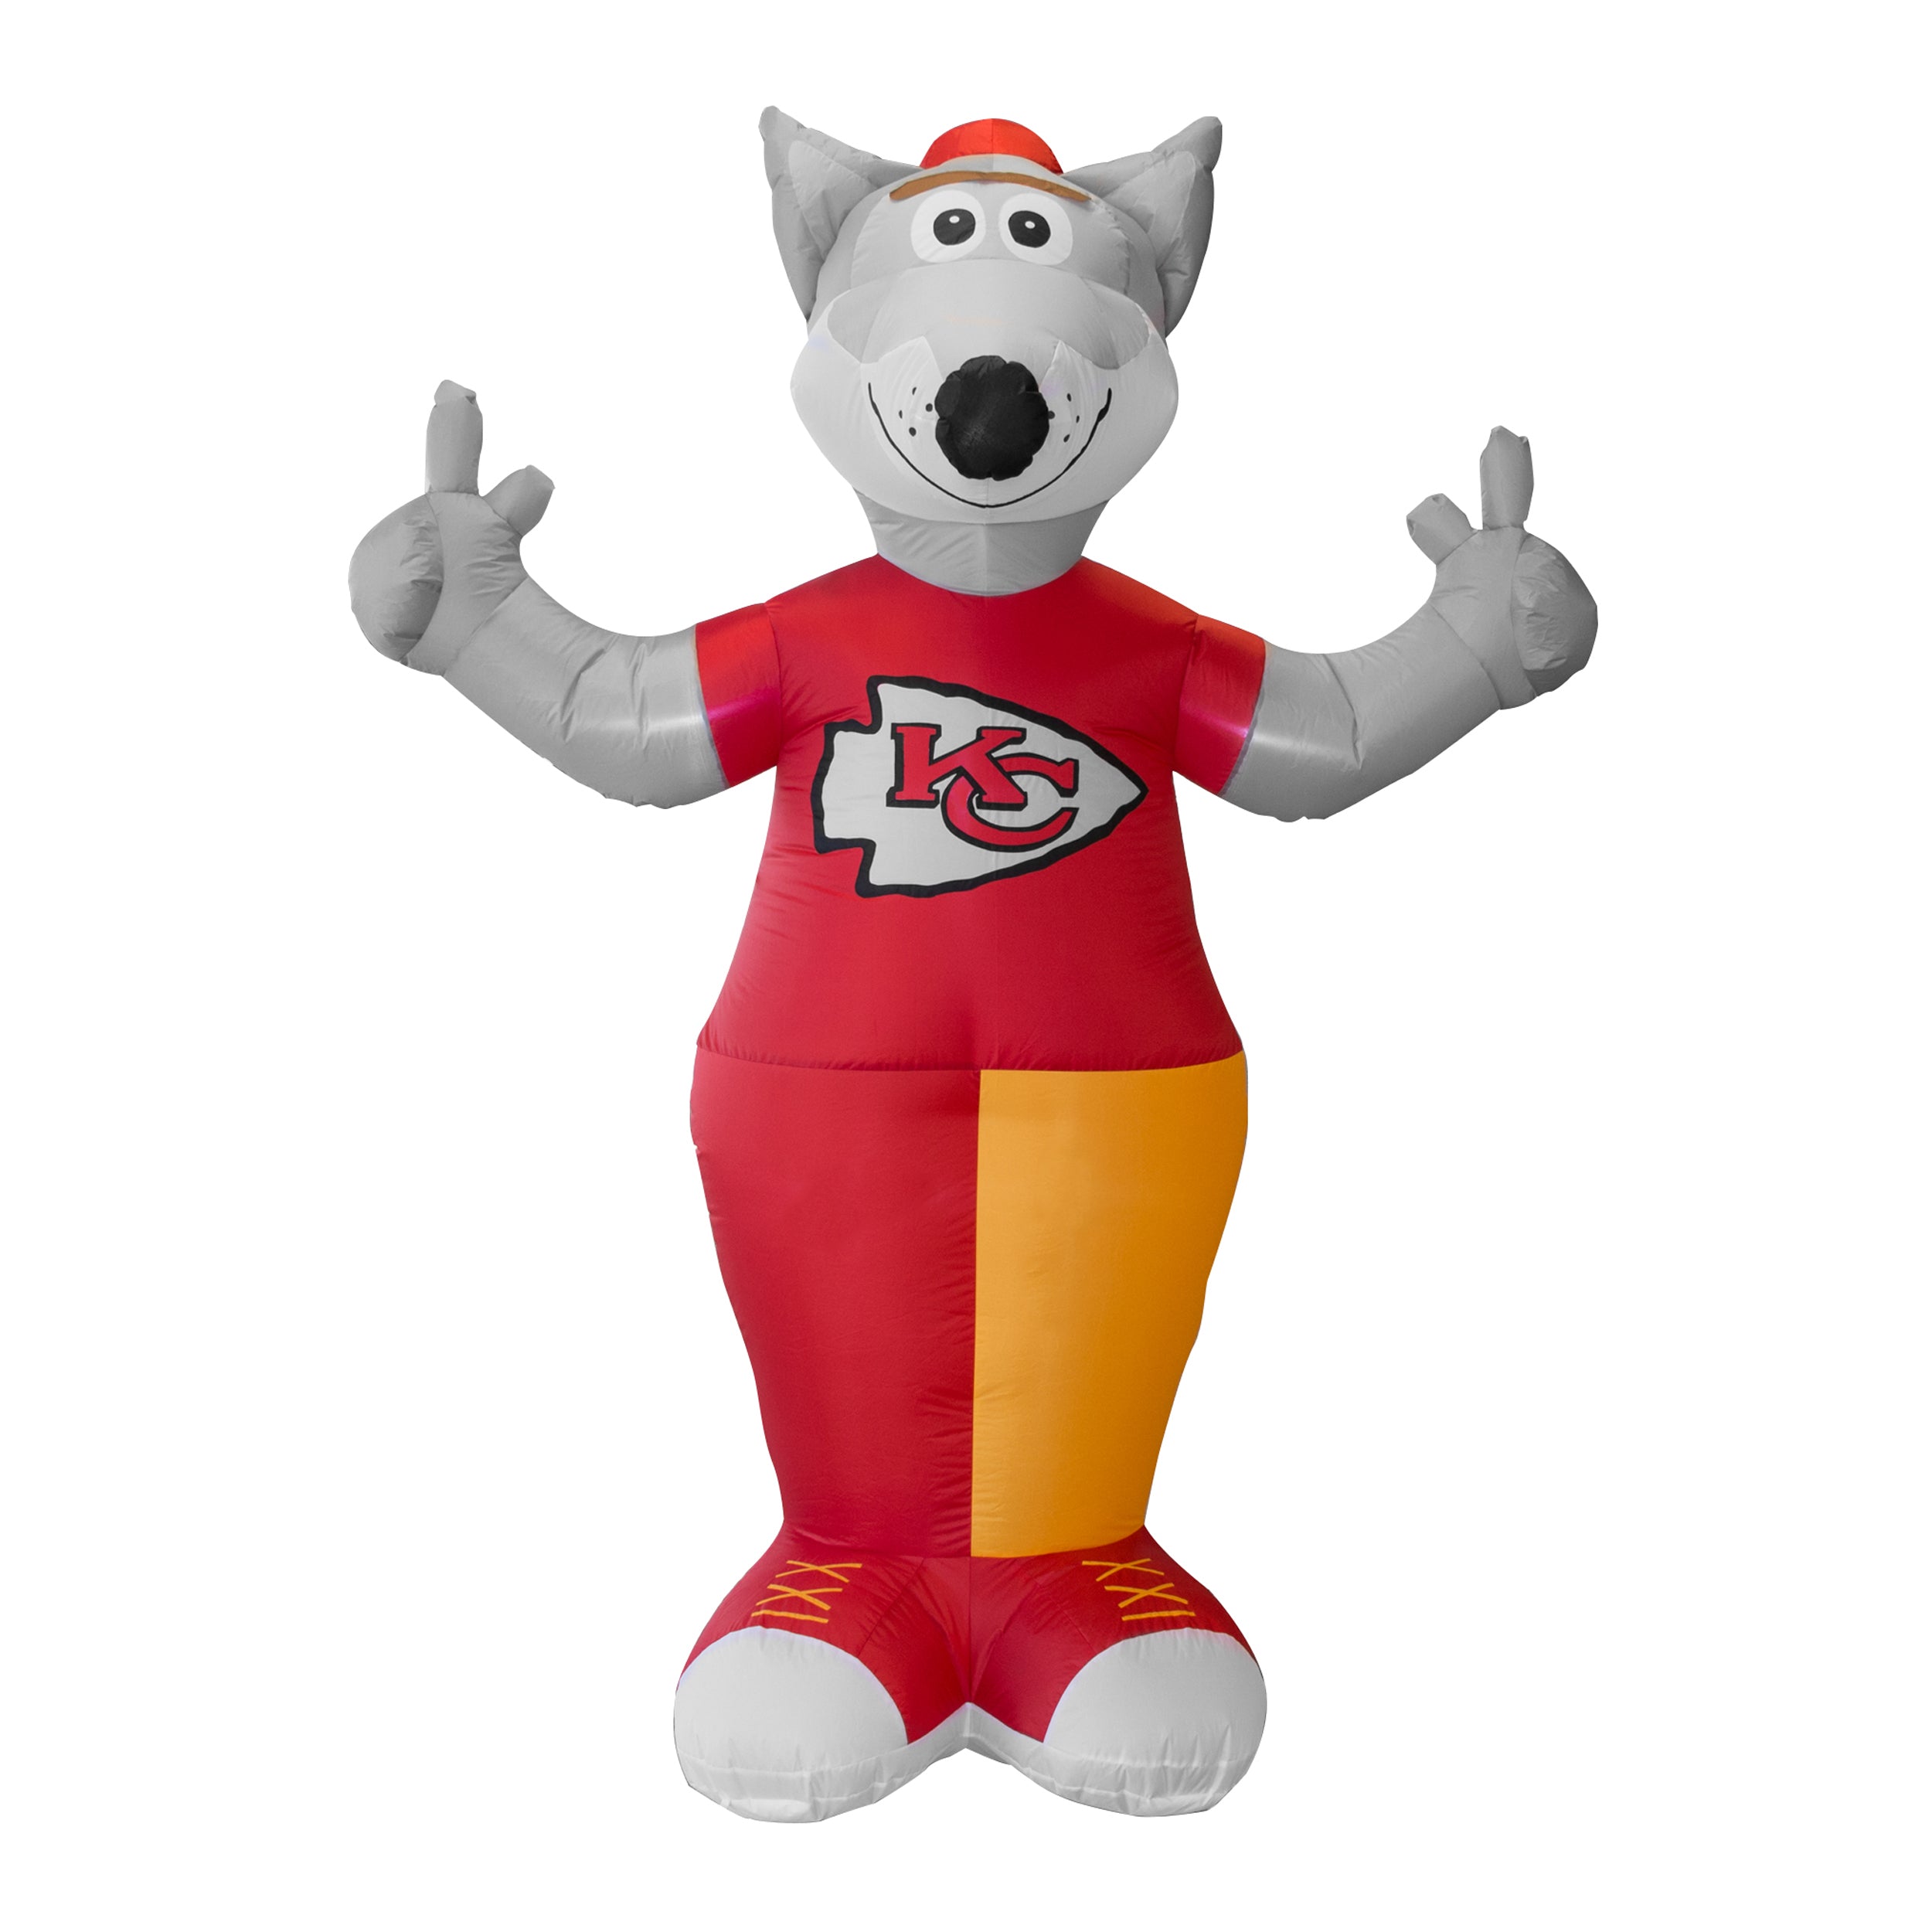 Why is the Kansas City Chiefs Mascot a Wolf?